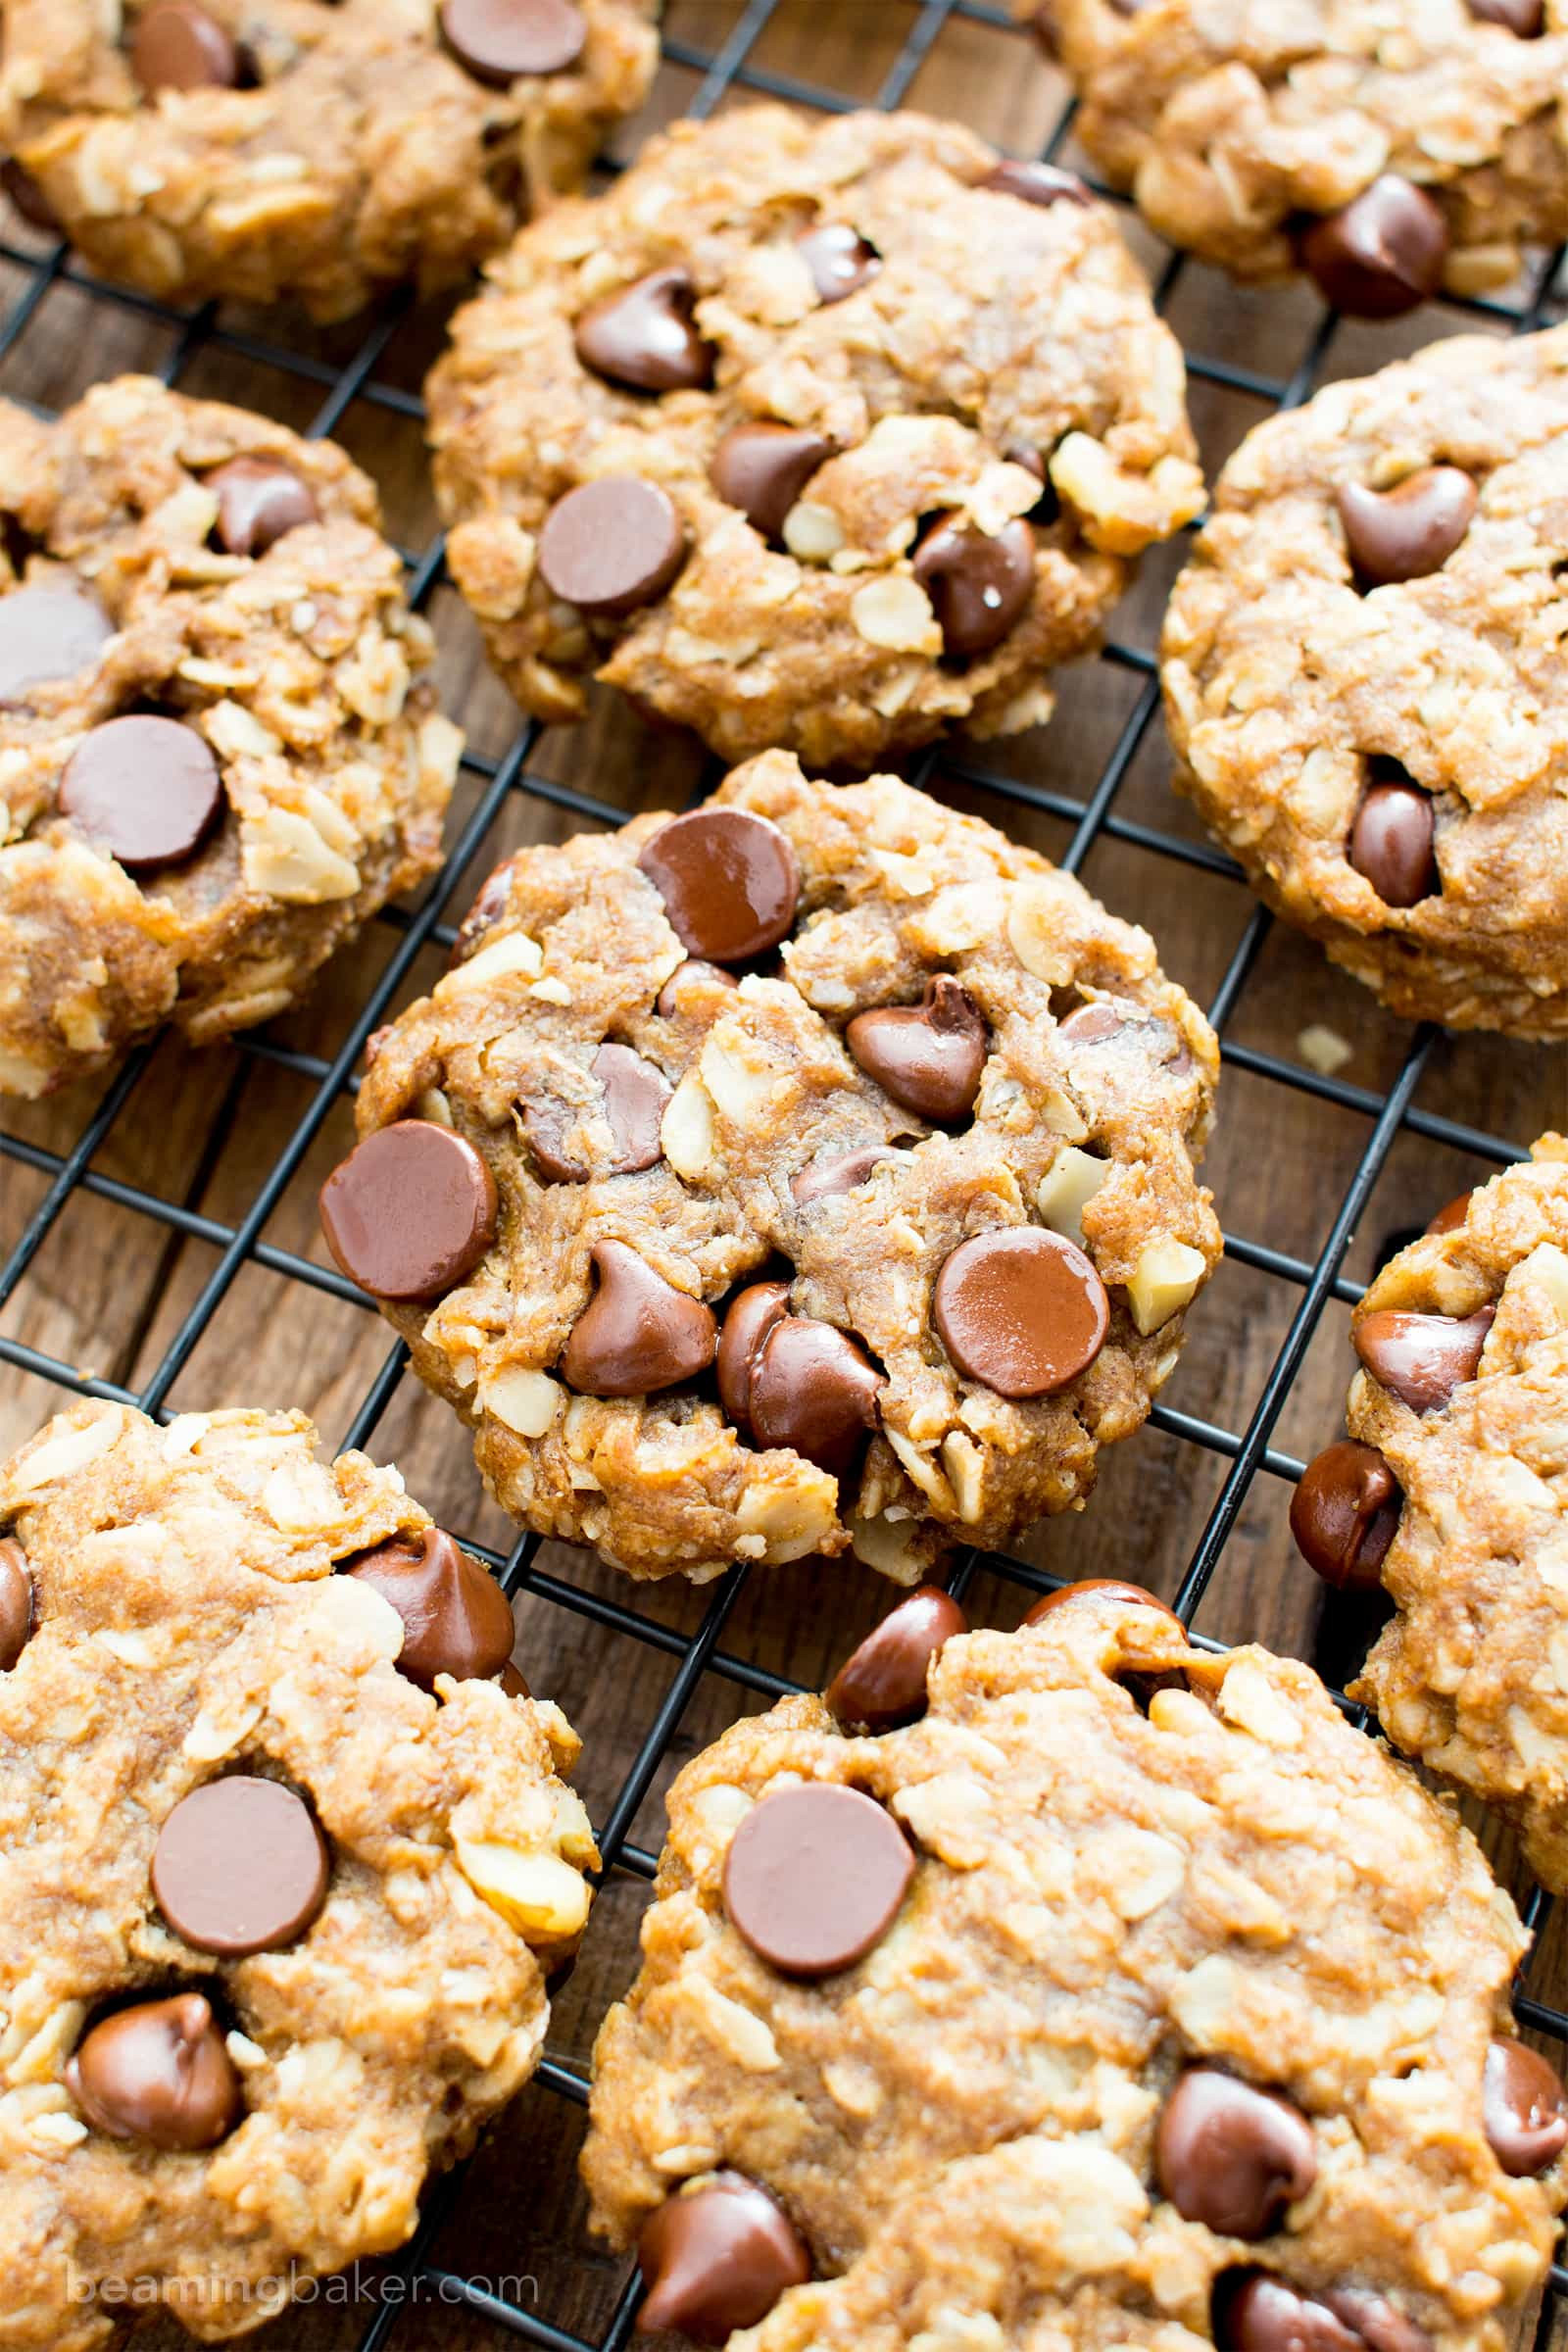 Easy Vegan Peanut Butter Cookies
 Easy Gluten Free Peanut Butter Chocolate Chip Oatmeal